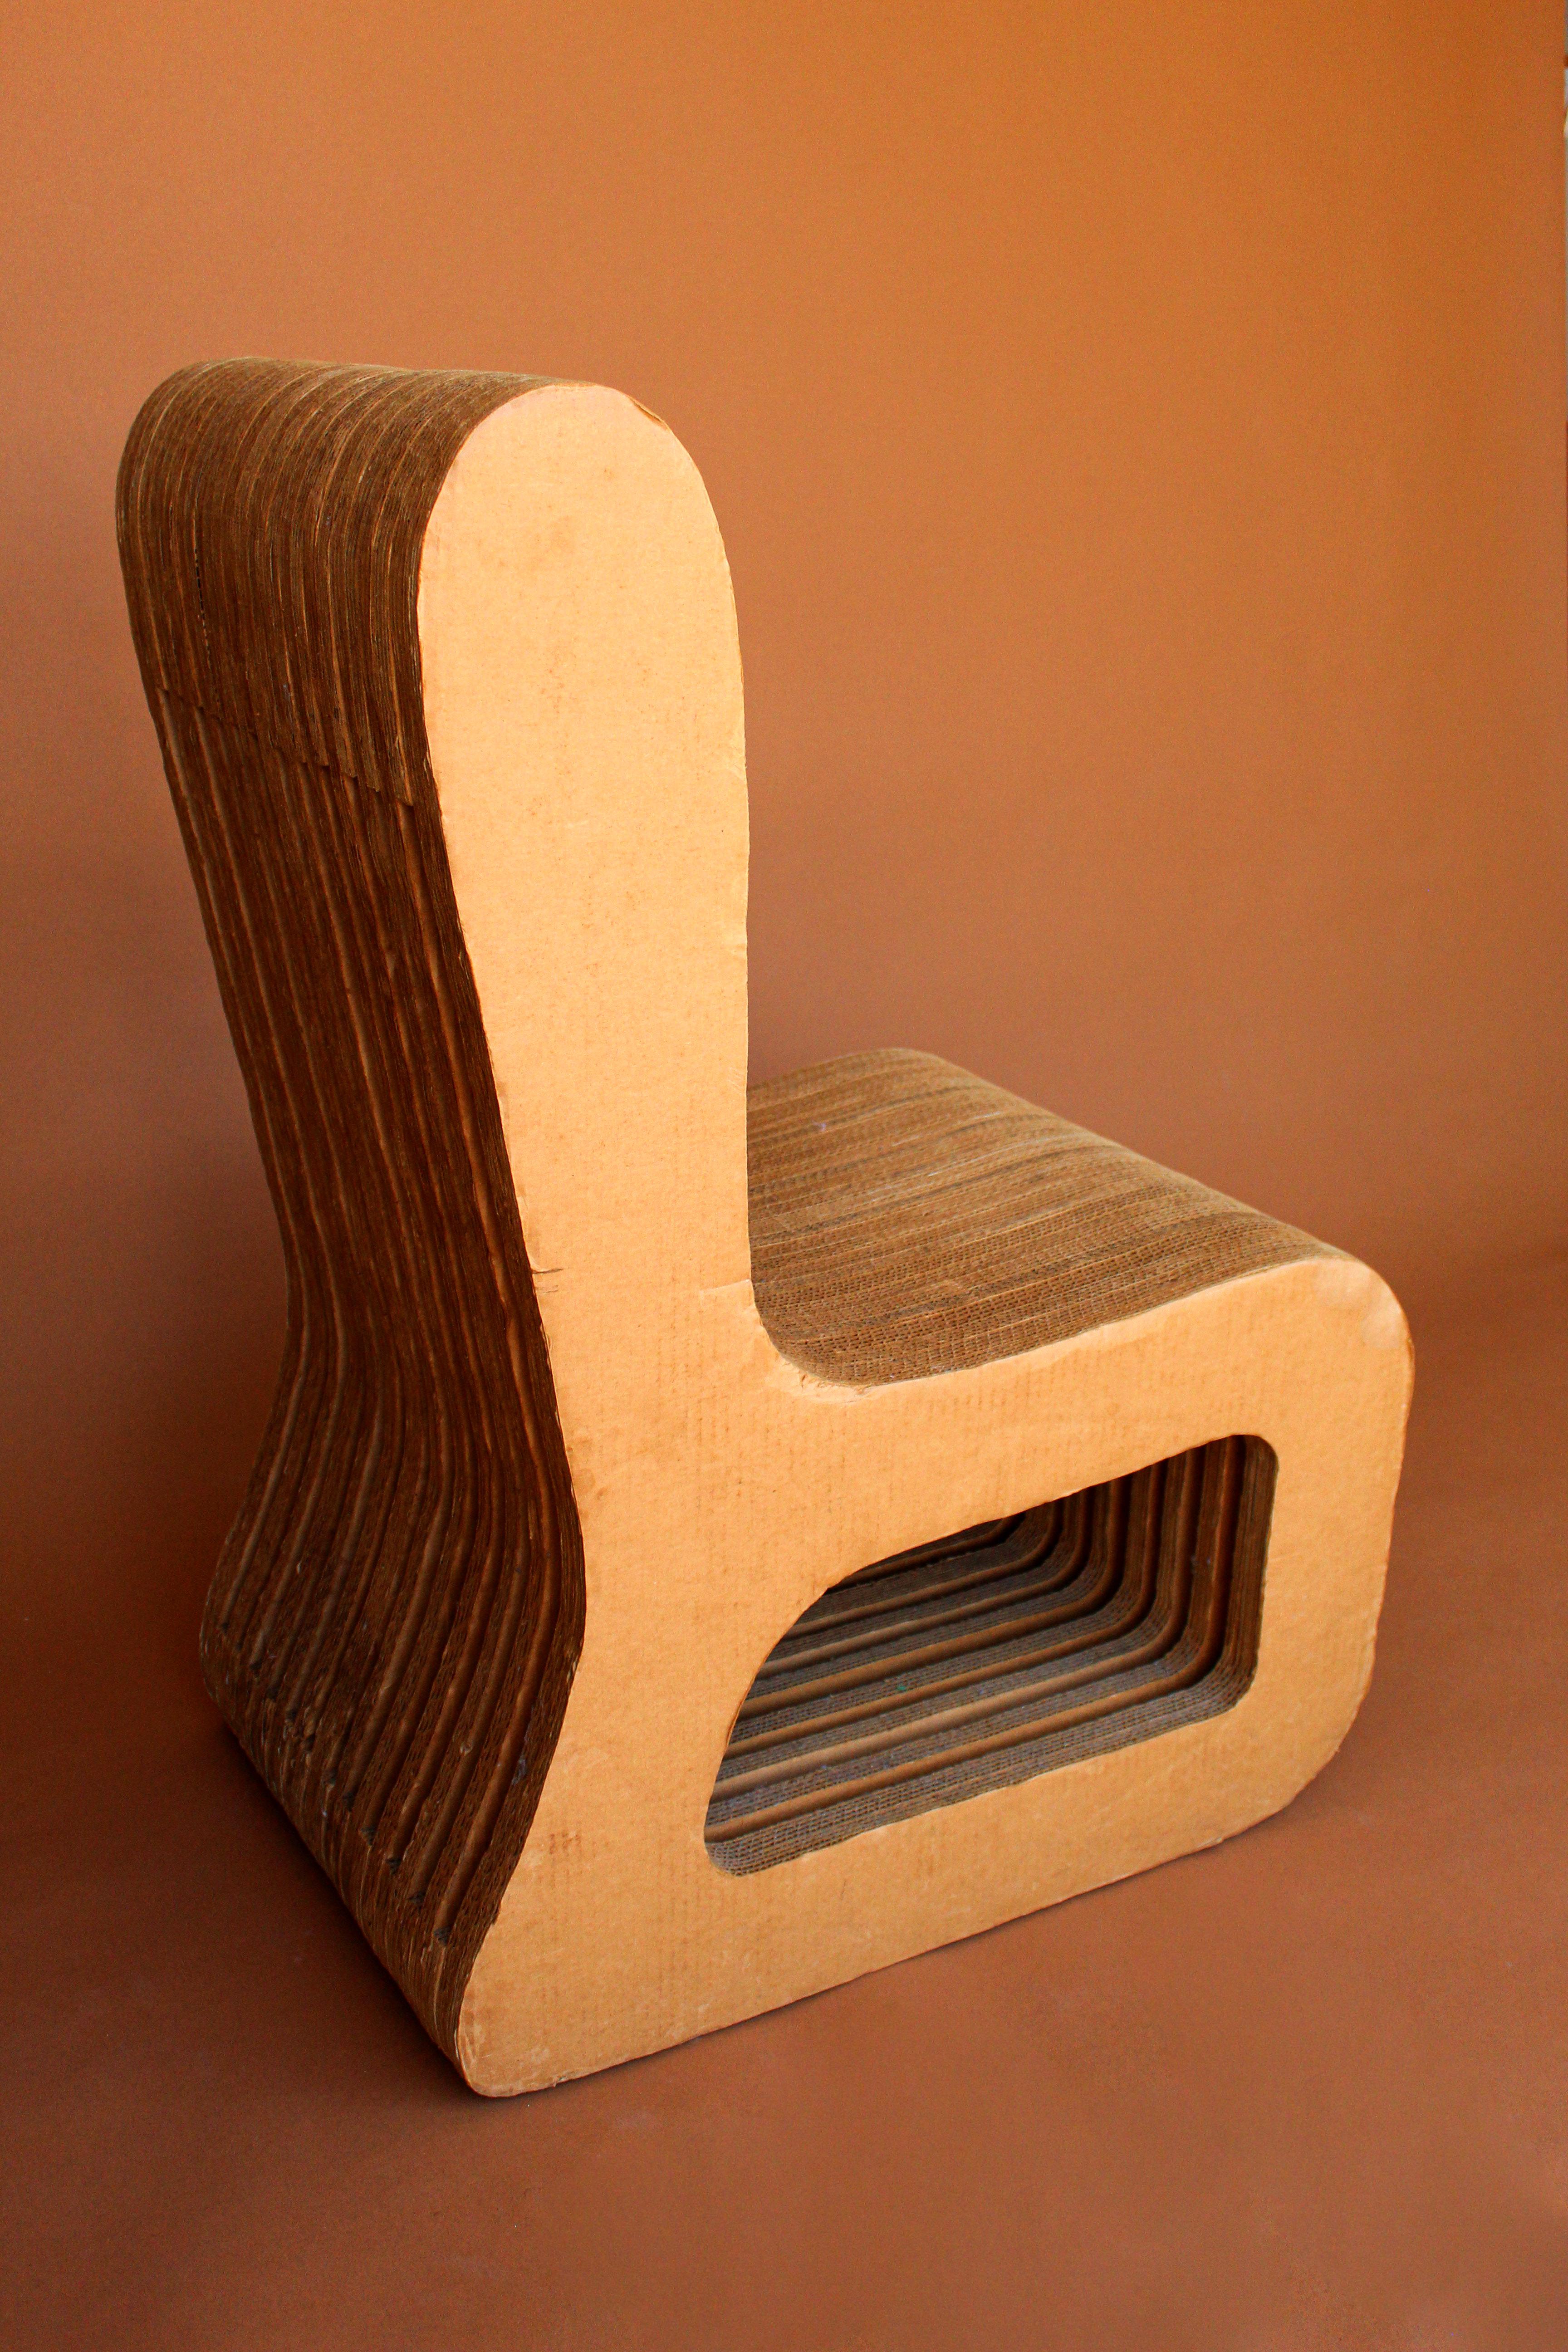 American Vintage Post Modern Corrugated Chair in the Style of Frank Gehry